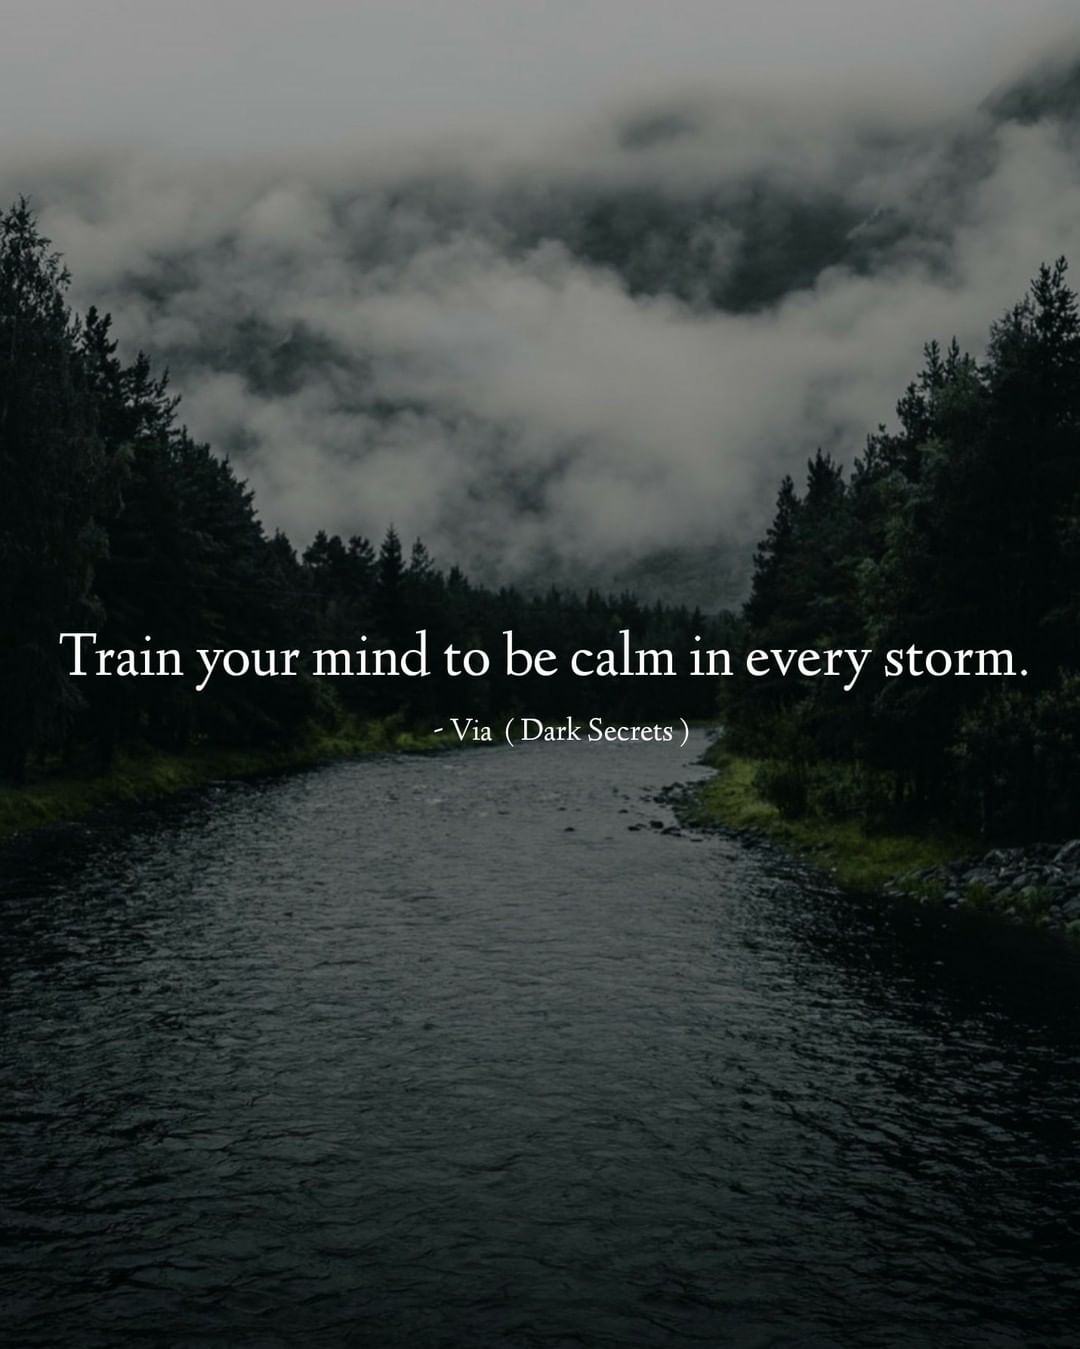 Train your mind to be calm in every storm. - Phrases